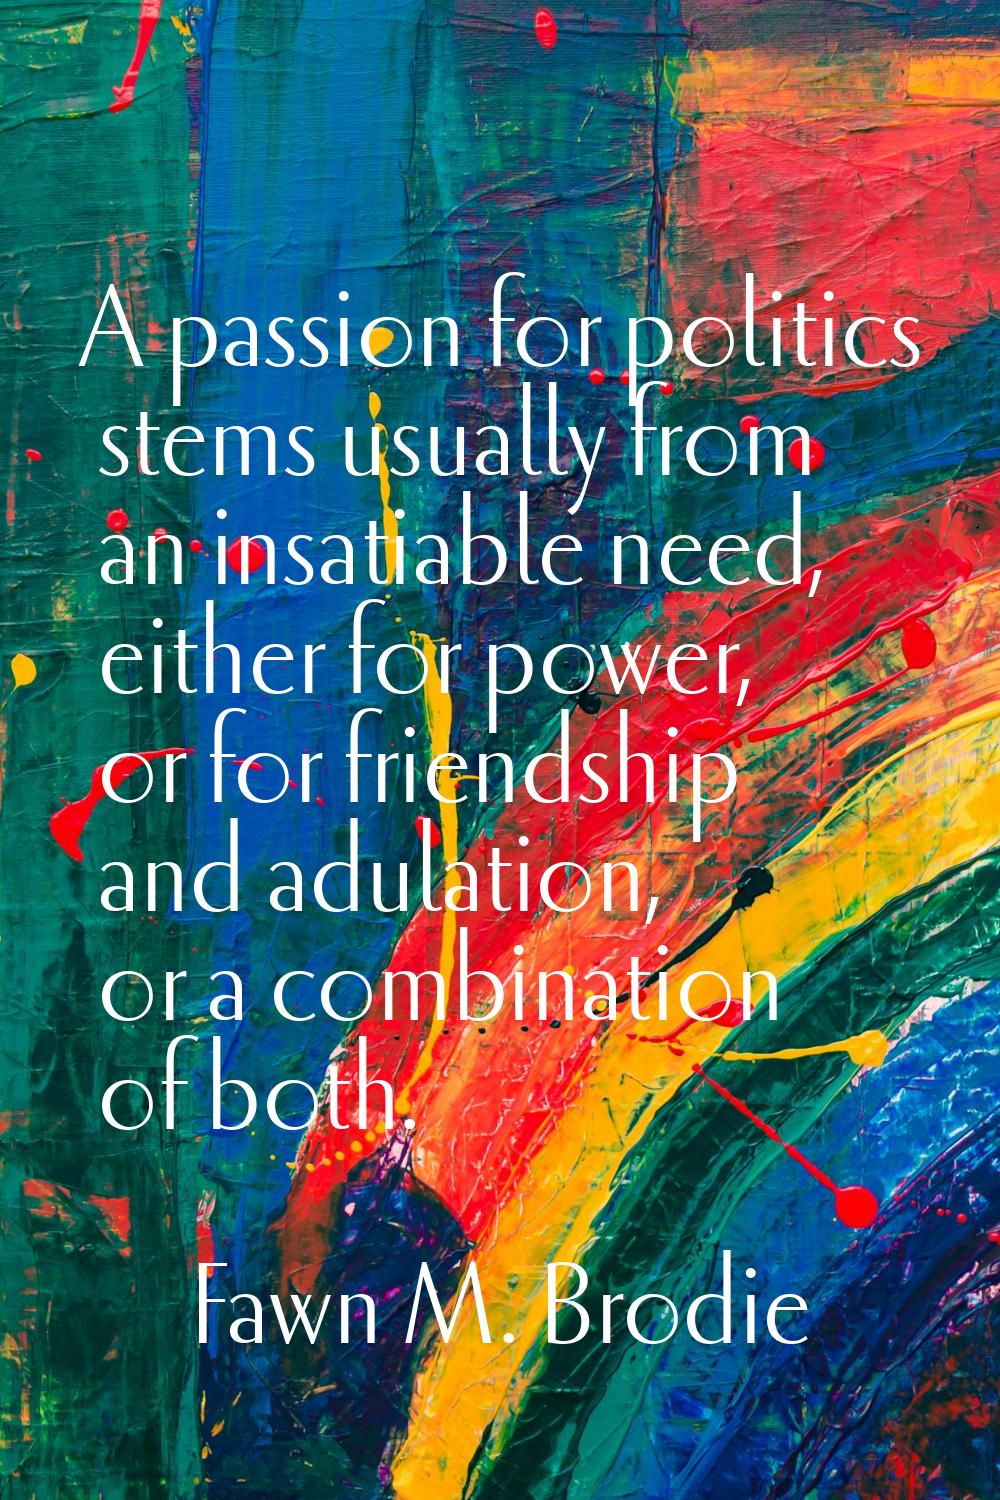 A passion for politics stems usually from an insatiable need, either for power, or for friendship a